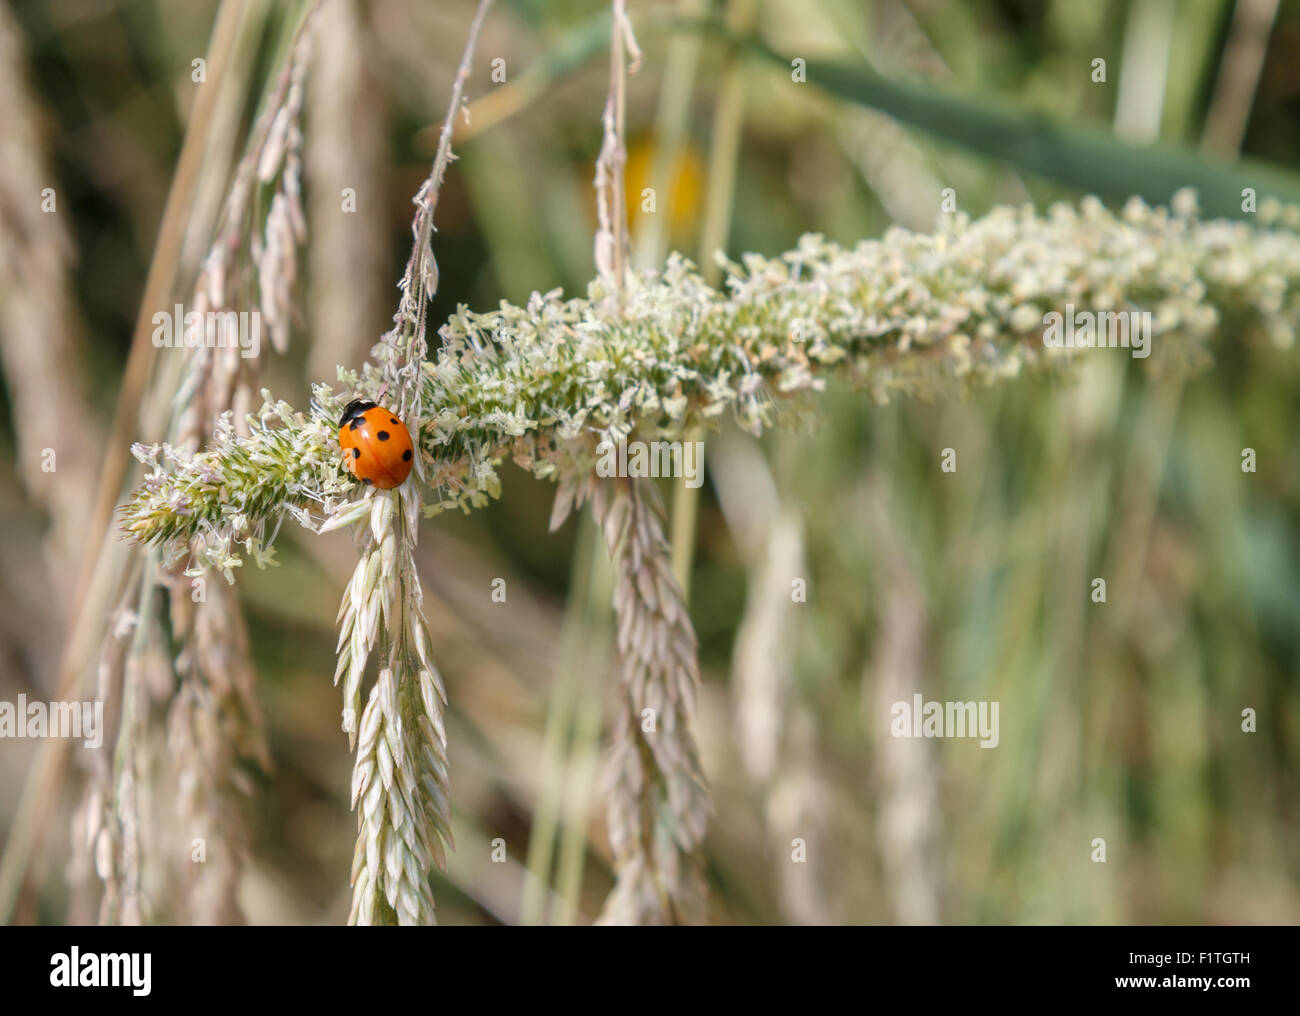 Ladybird on a grass flower stem.  The ladybird or ladybug is red and spotted Stock Photo